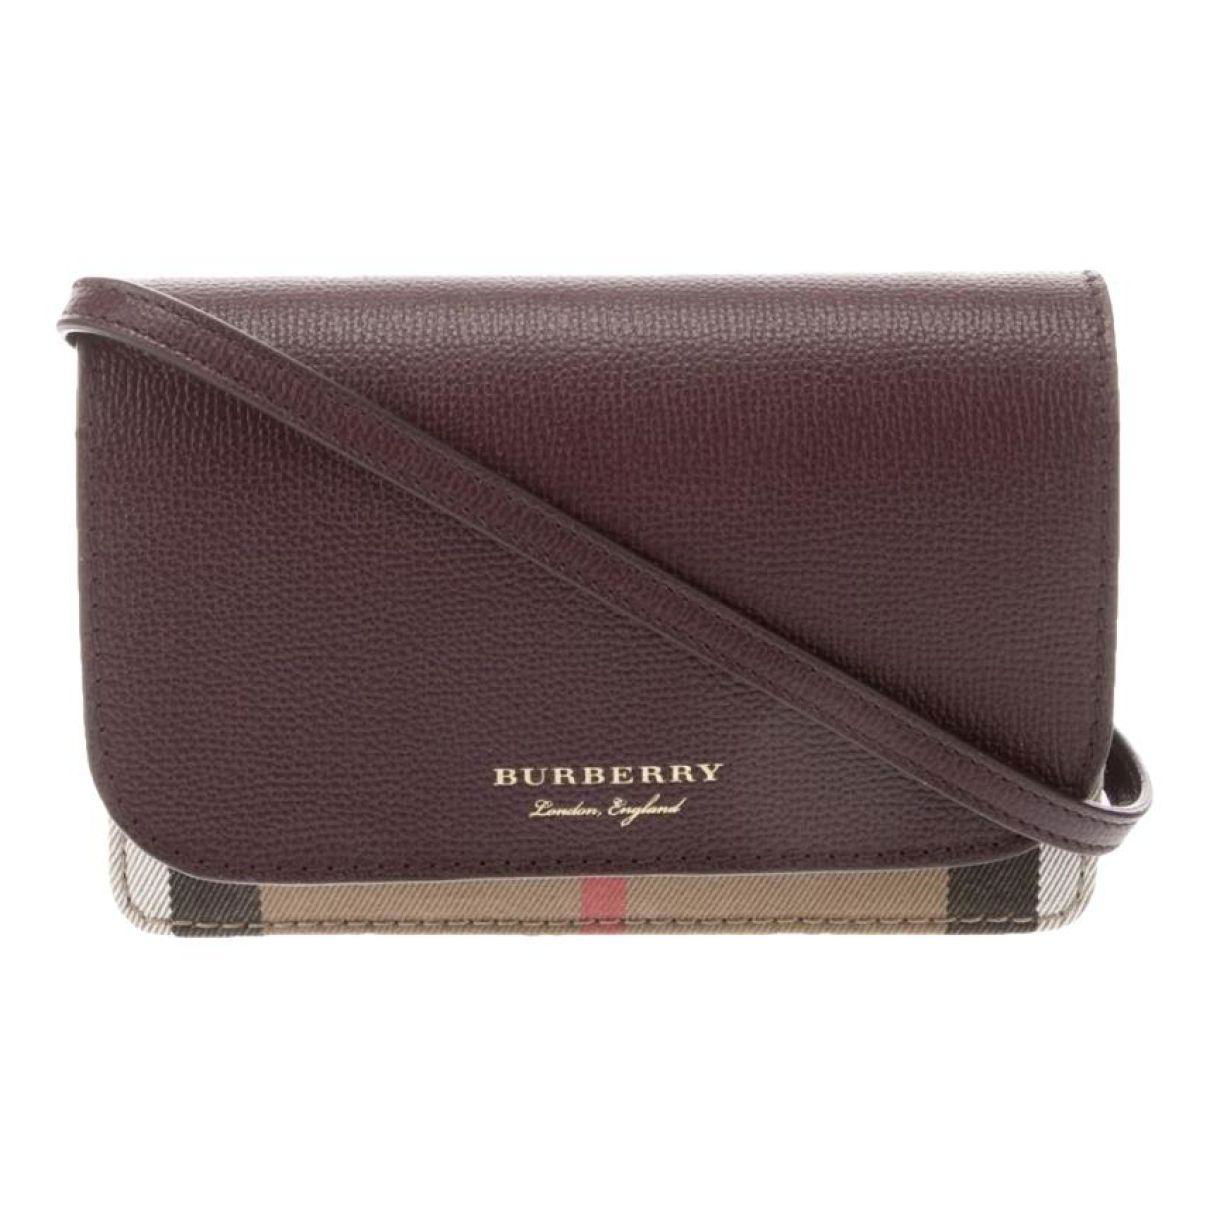 Leather crossbody bag by BURBERRY